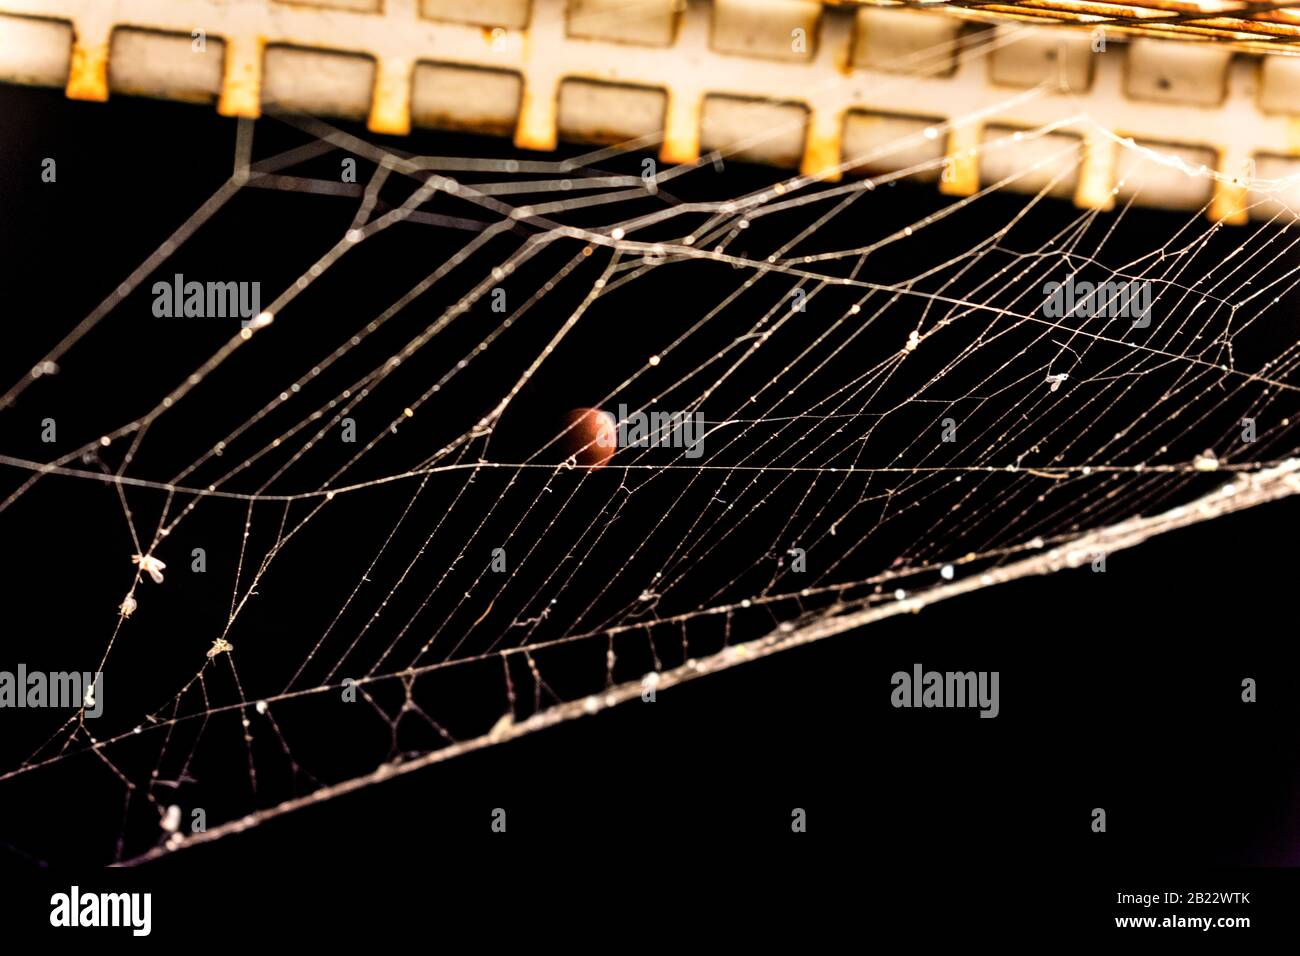 A spider web on metal railings awaits the built-in light Stock Photo